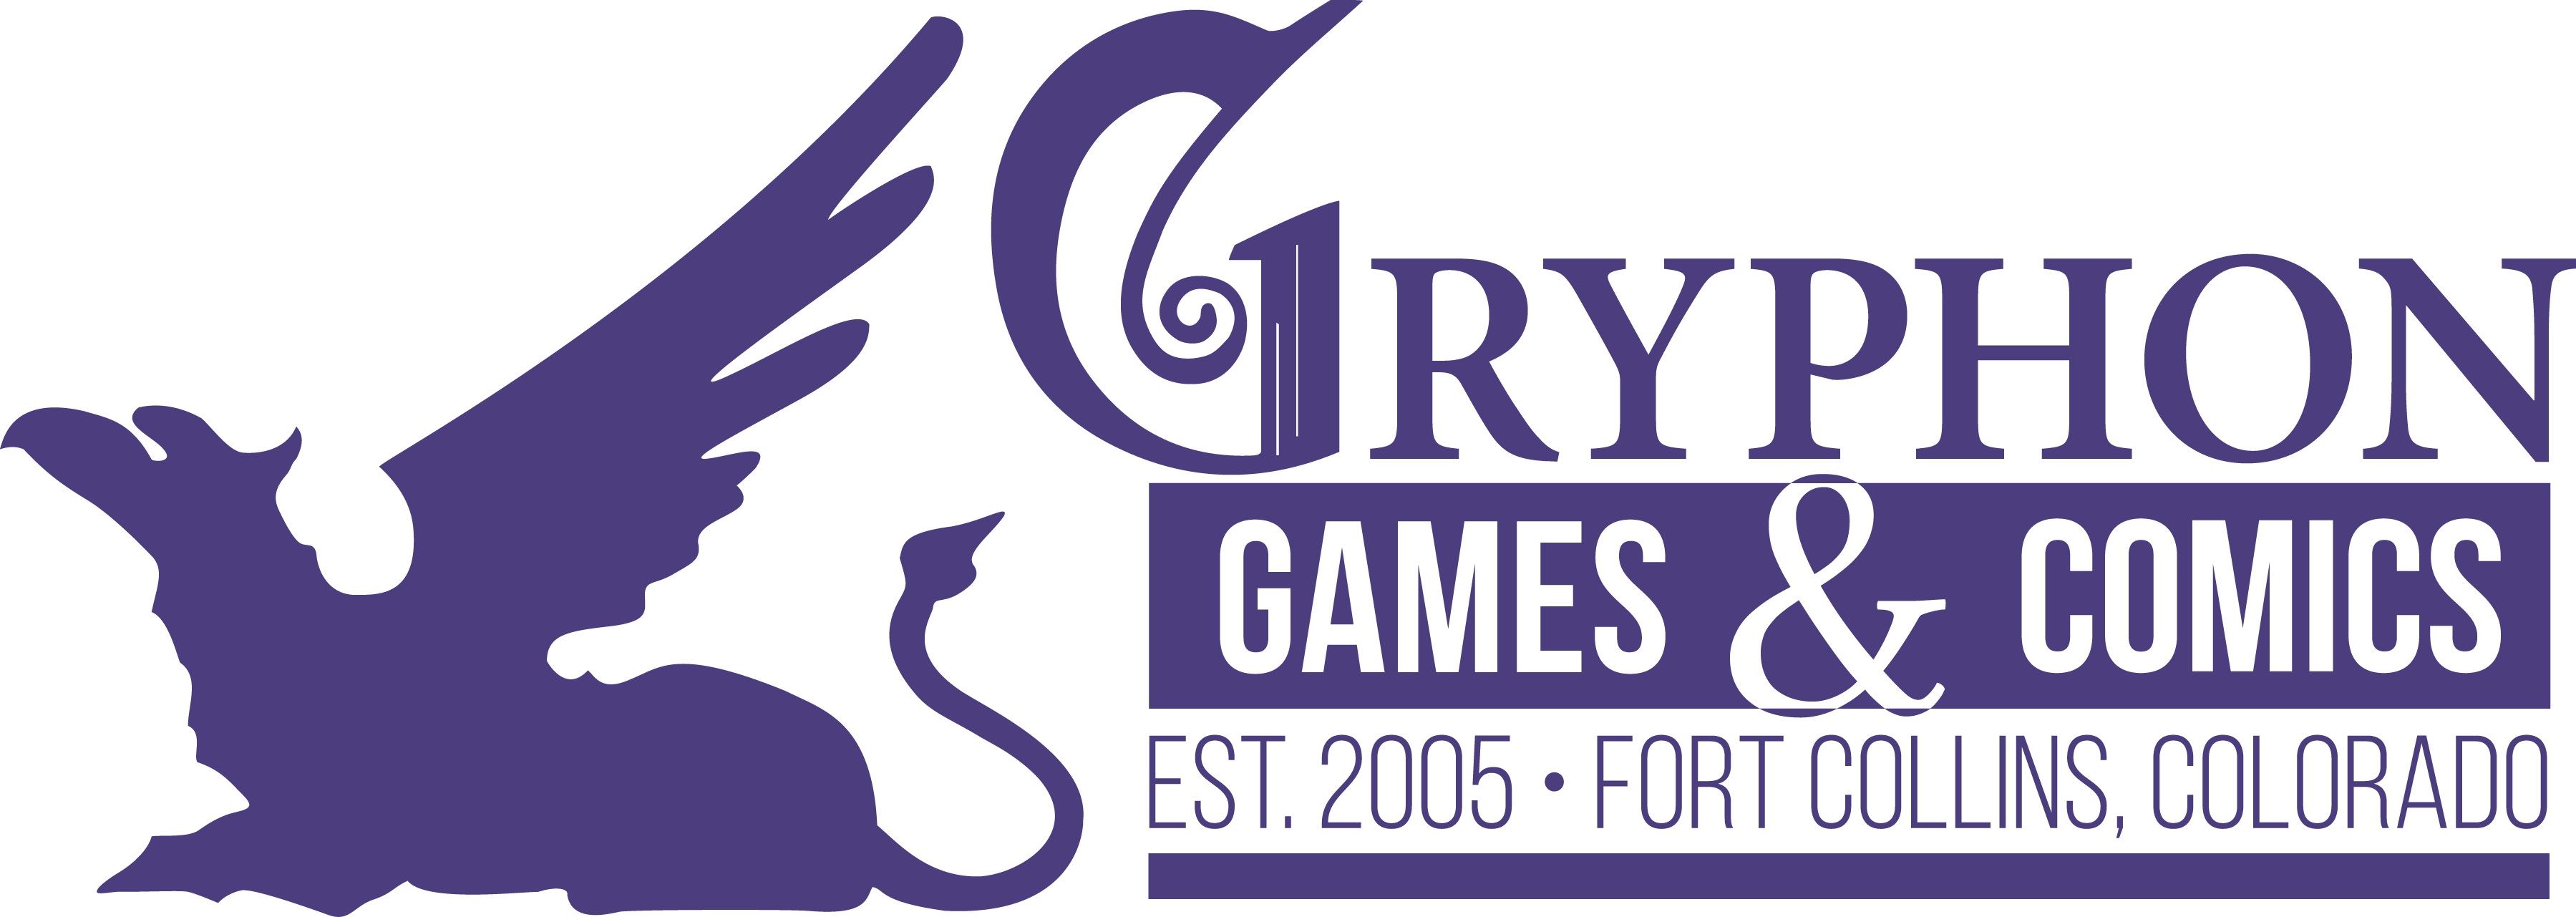 GRYPHON GAMES AND GAMES